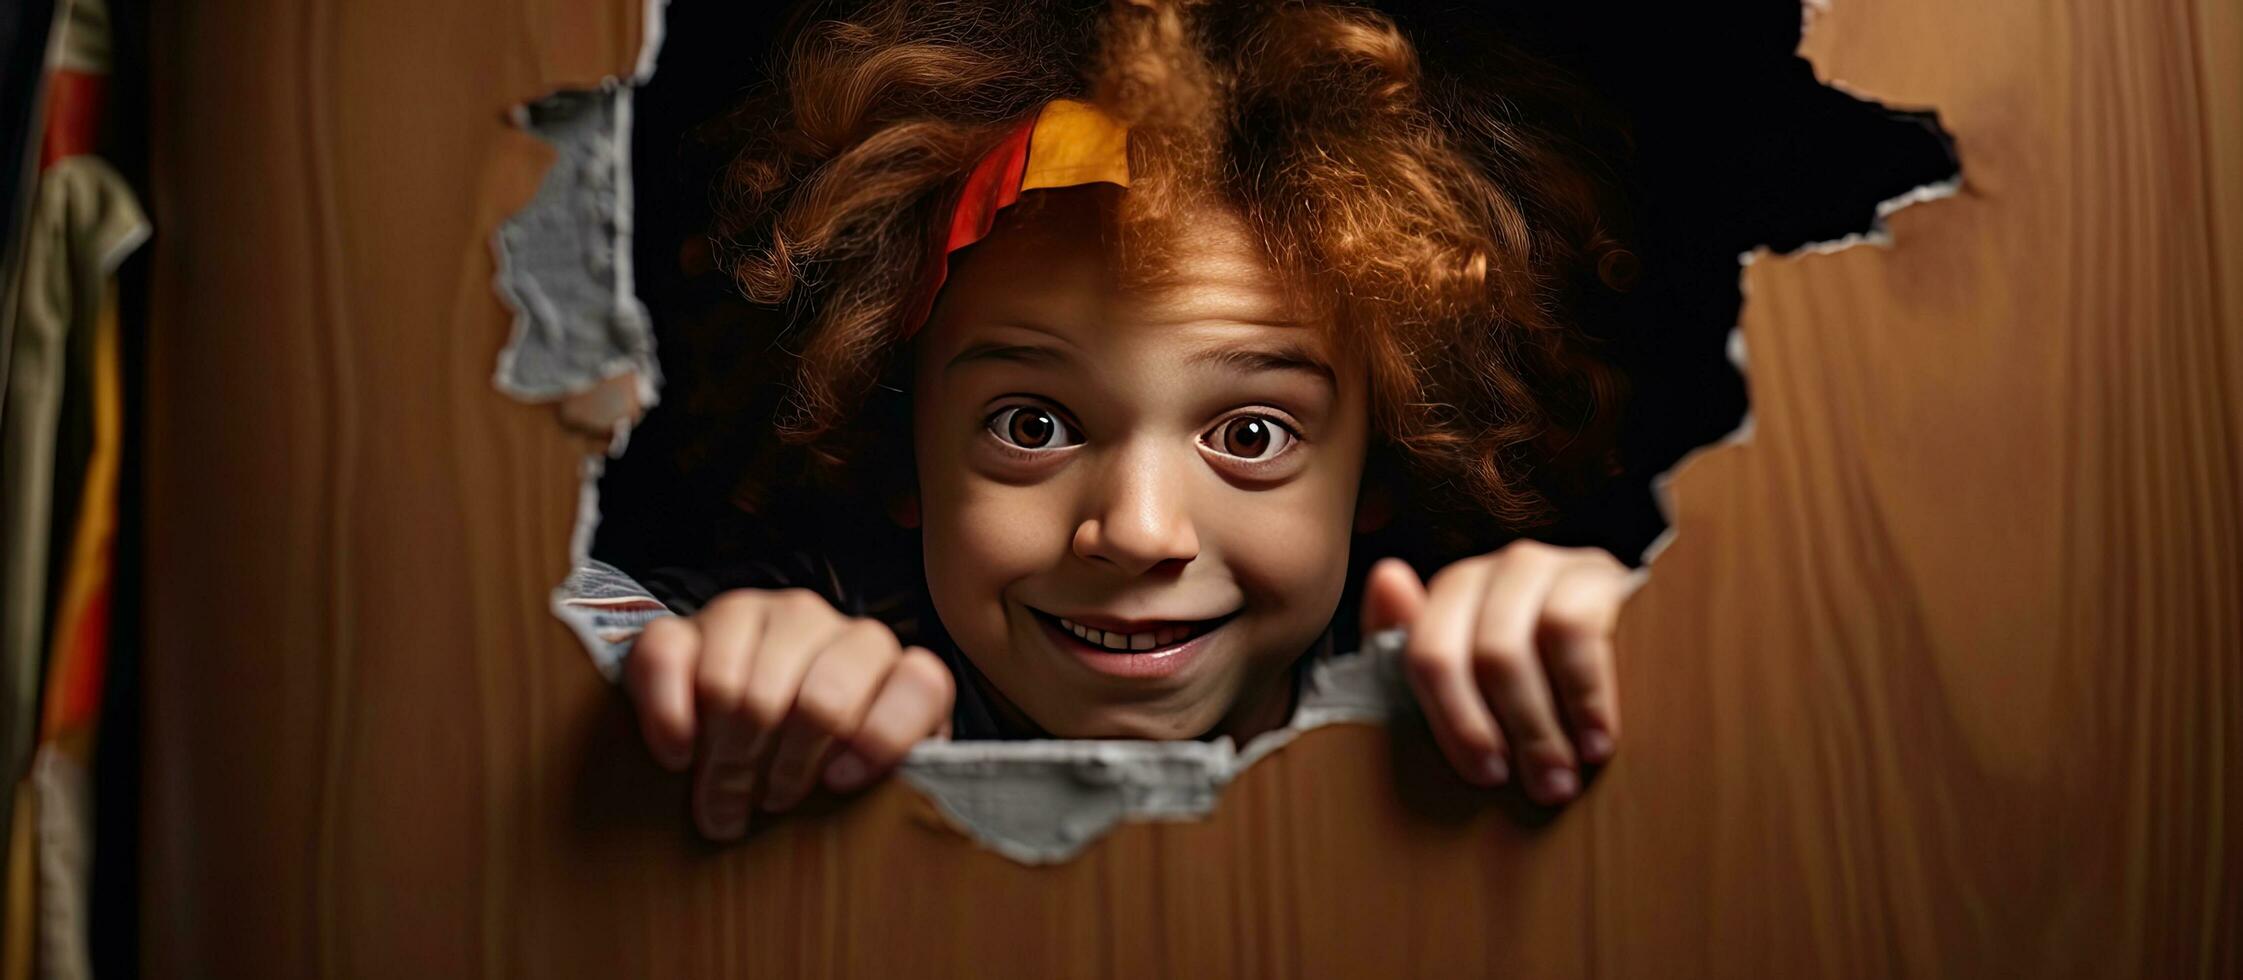 Child playing at home looking through cardboard hole April Fool s concept photo